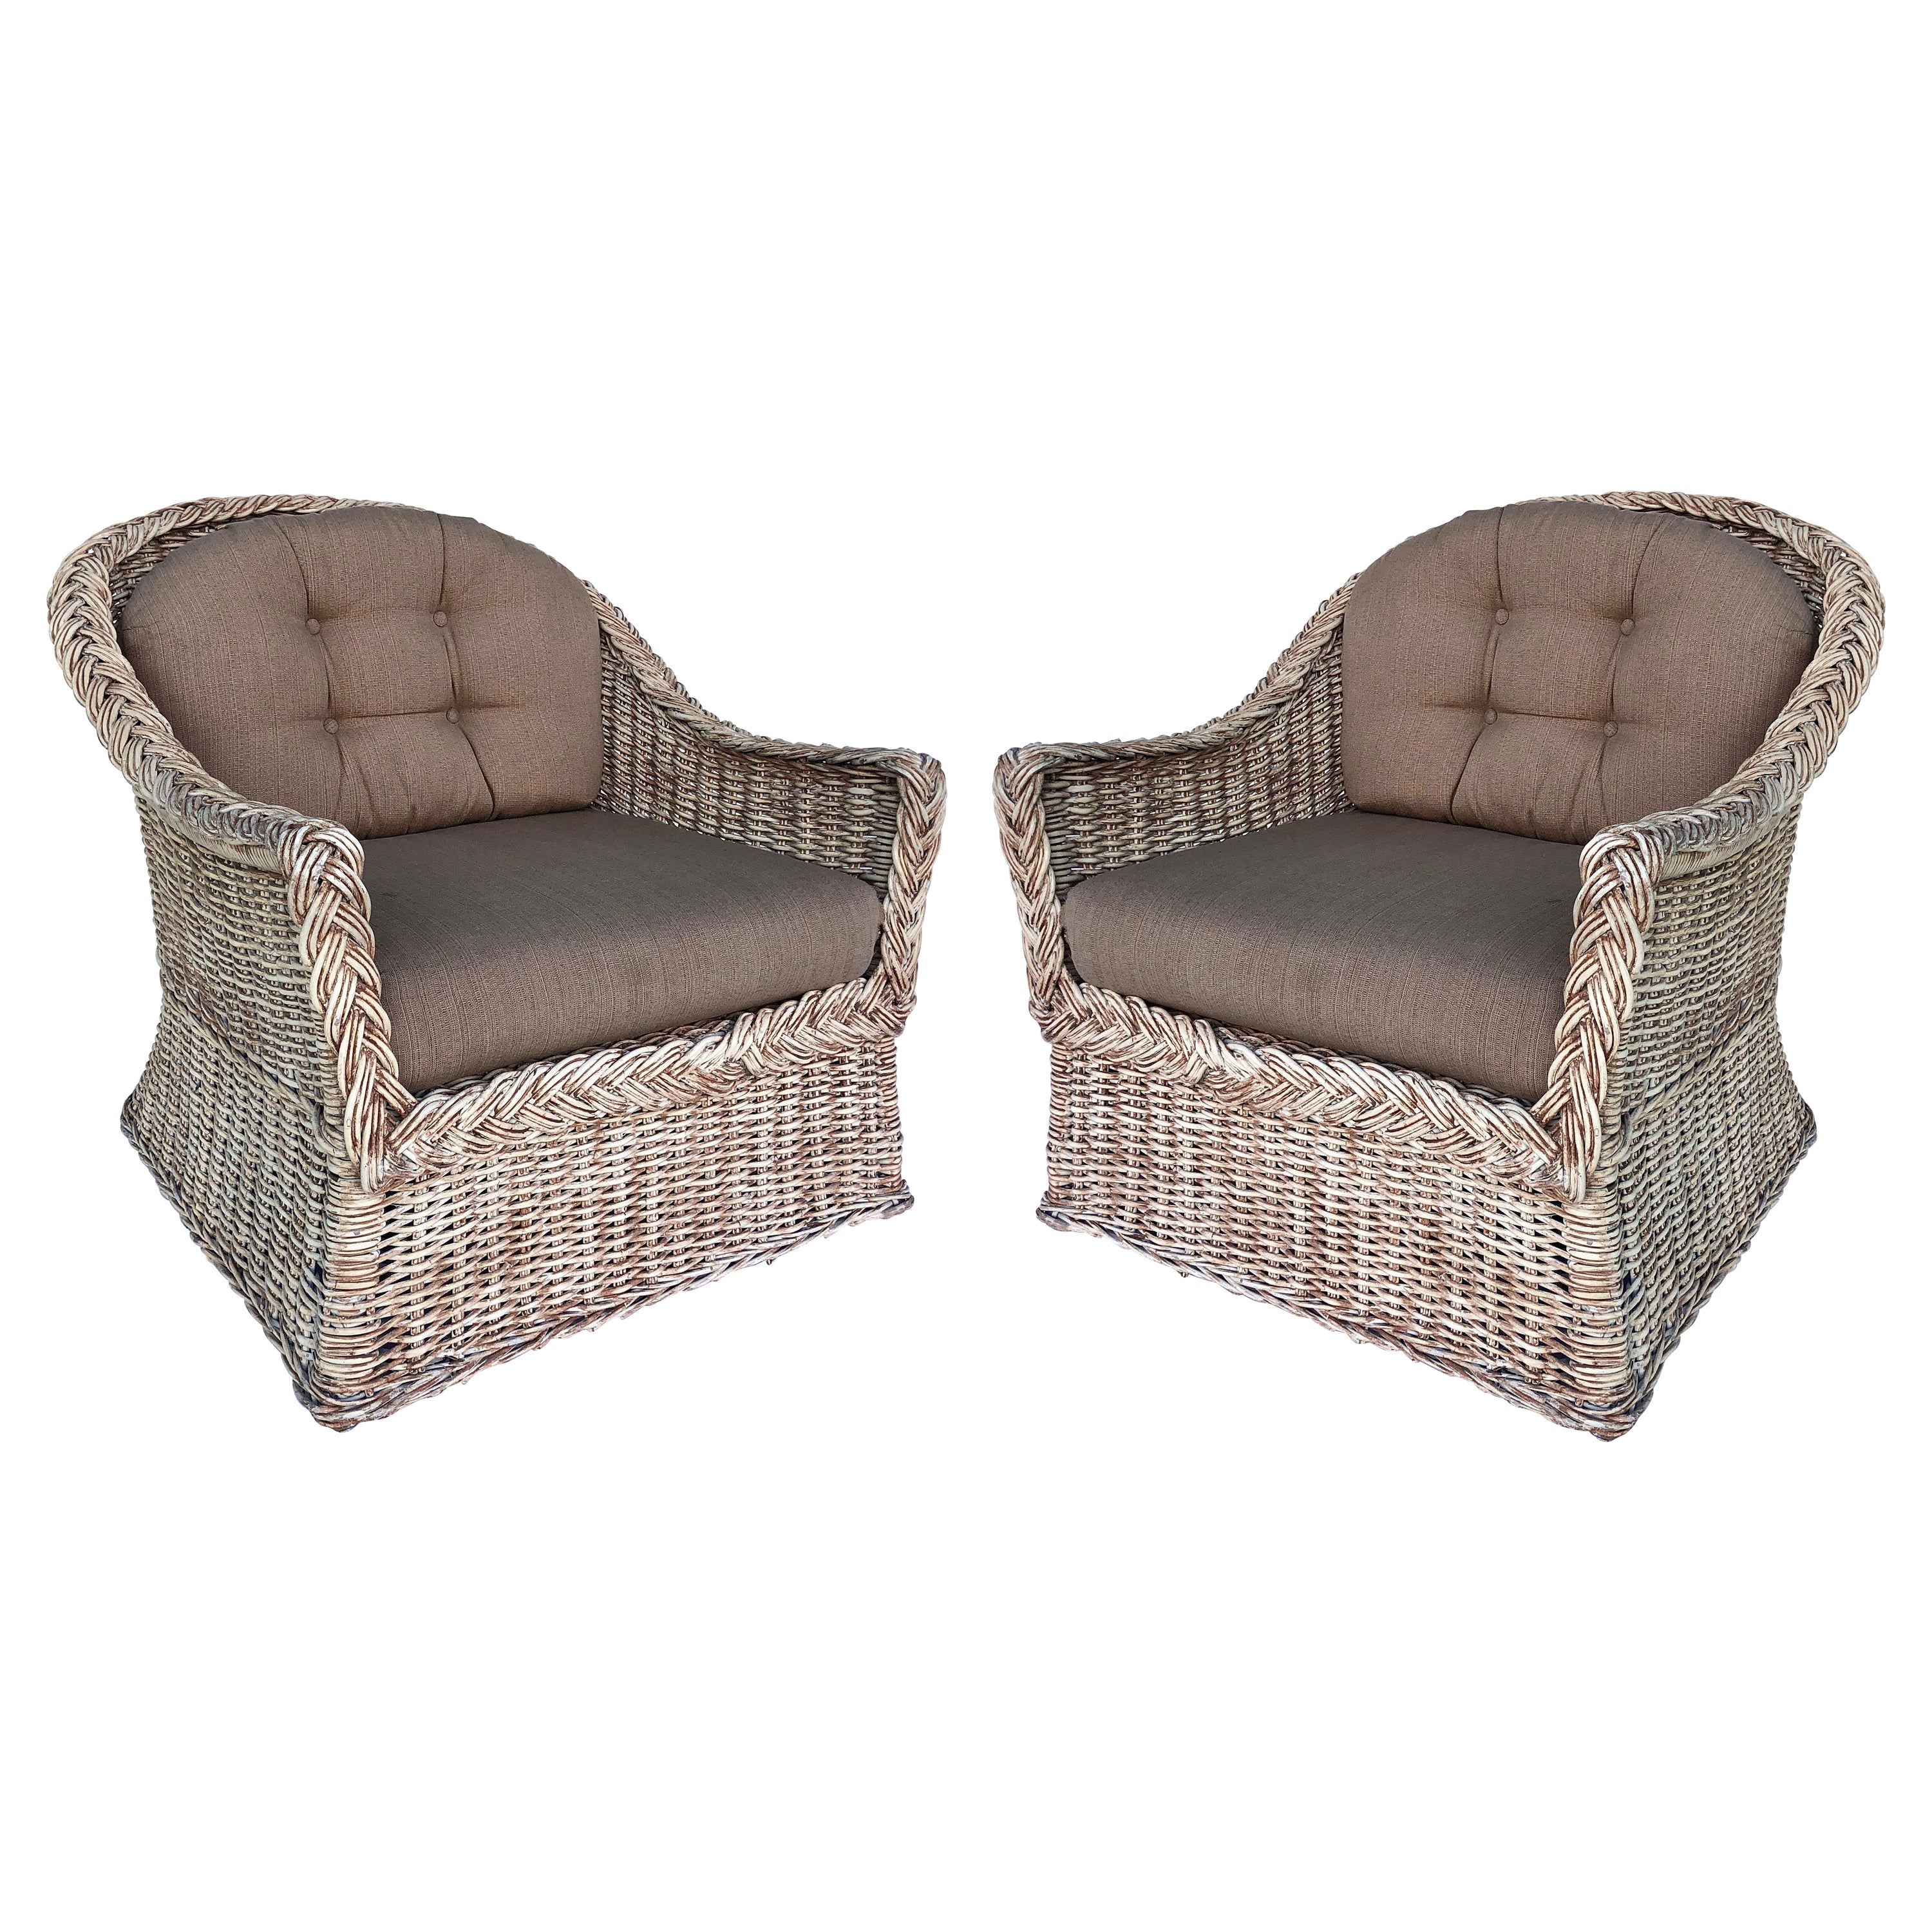 Vintage Bielecky Brothers Woven Rattan Lounge Chairs, Pair